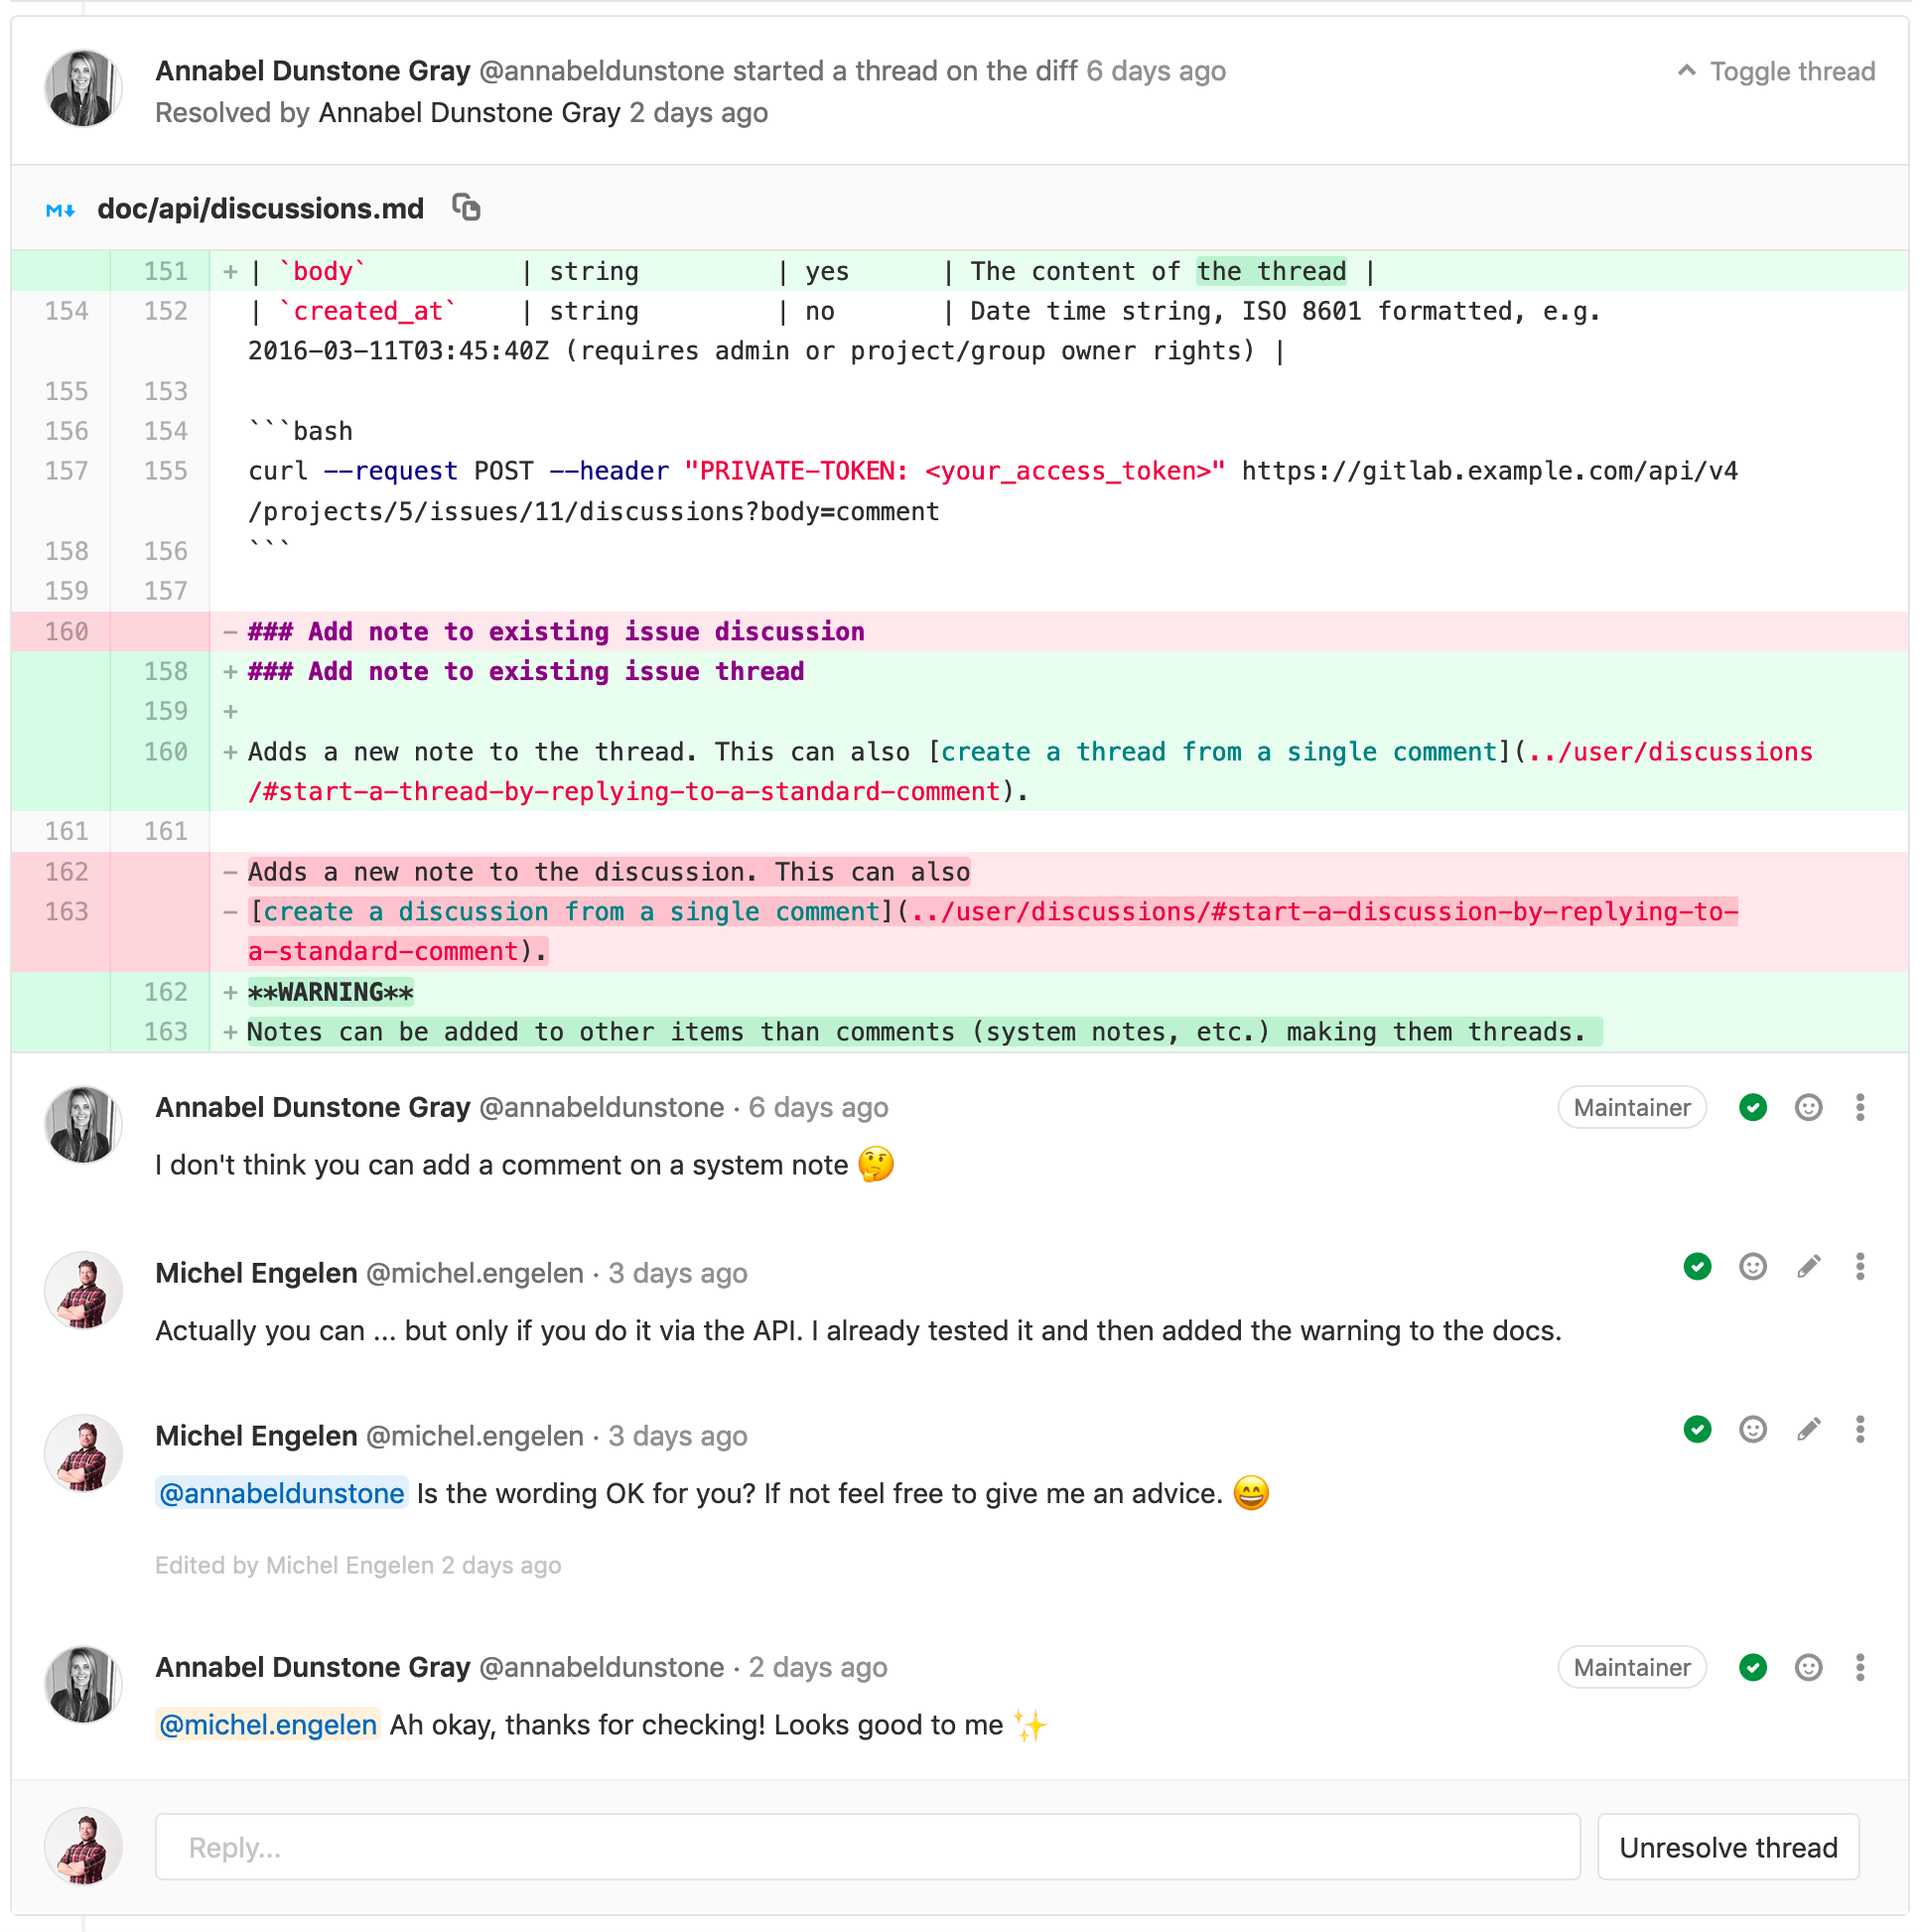 "A thread between two people on a piece of code"